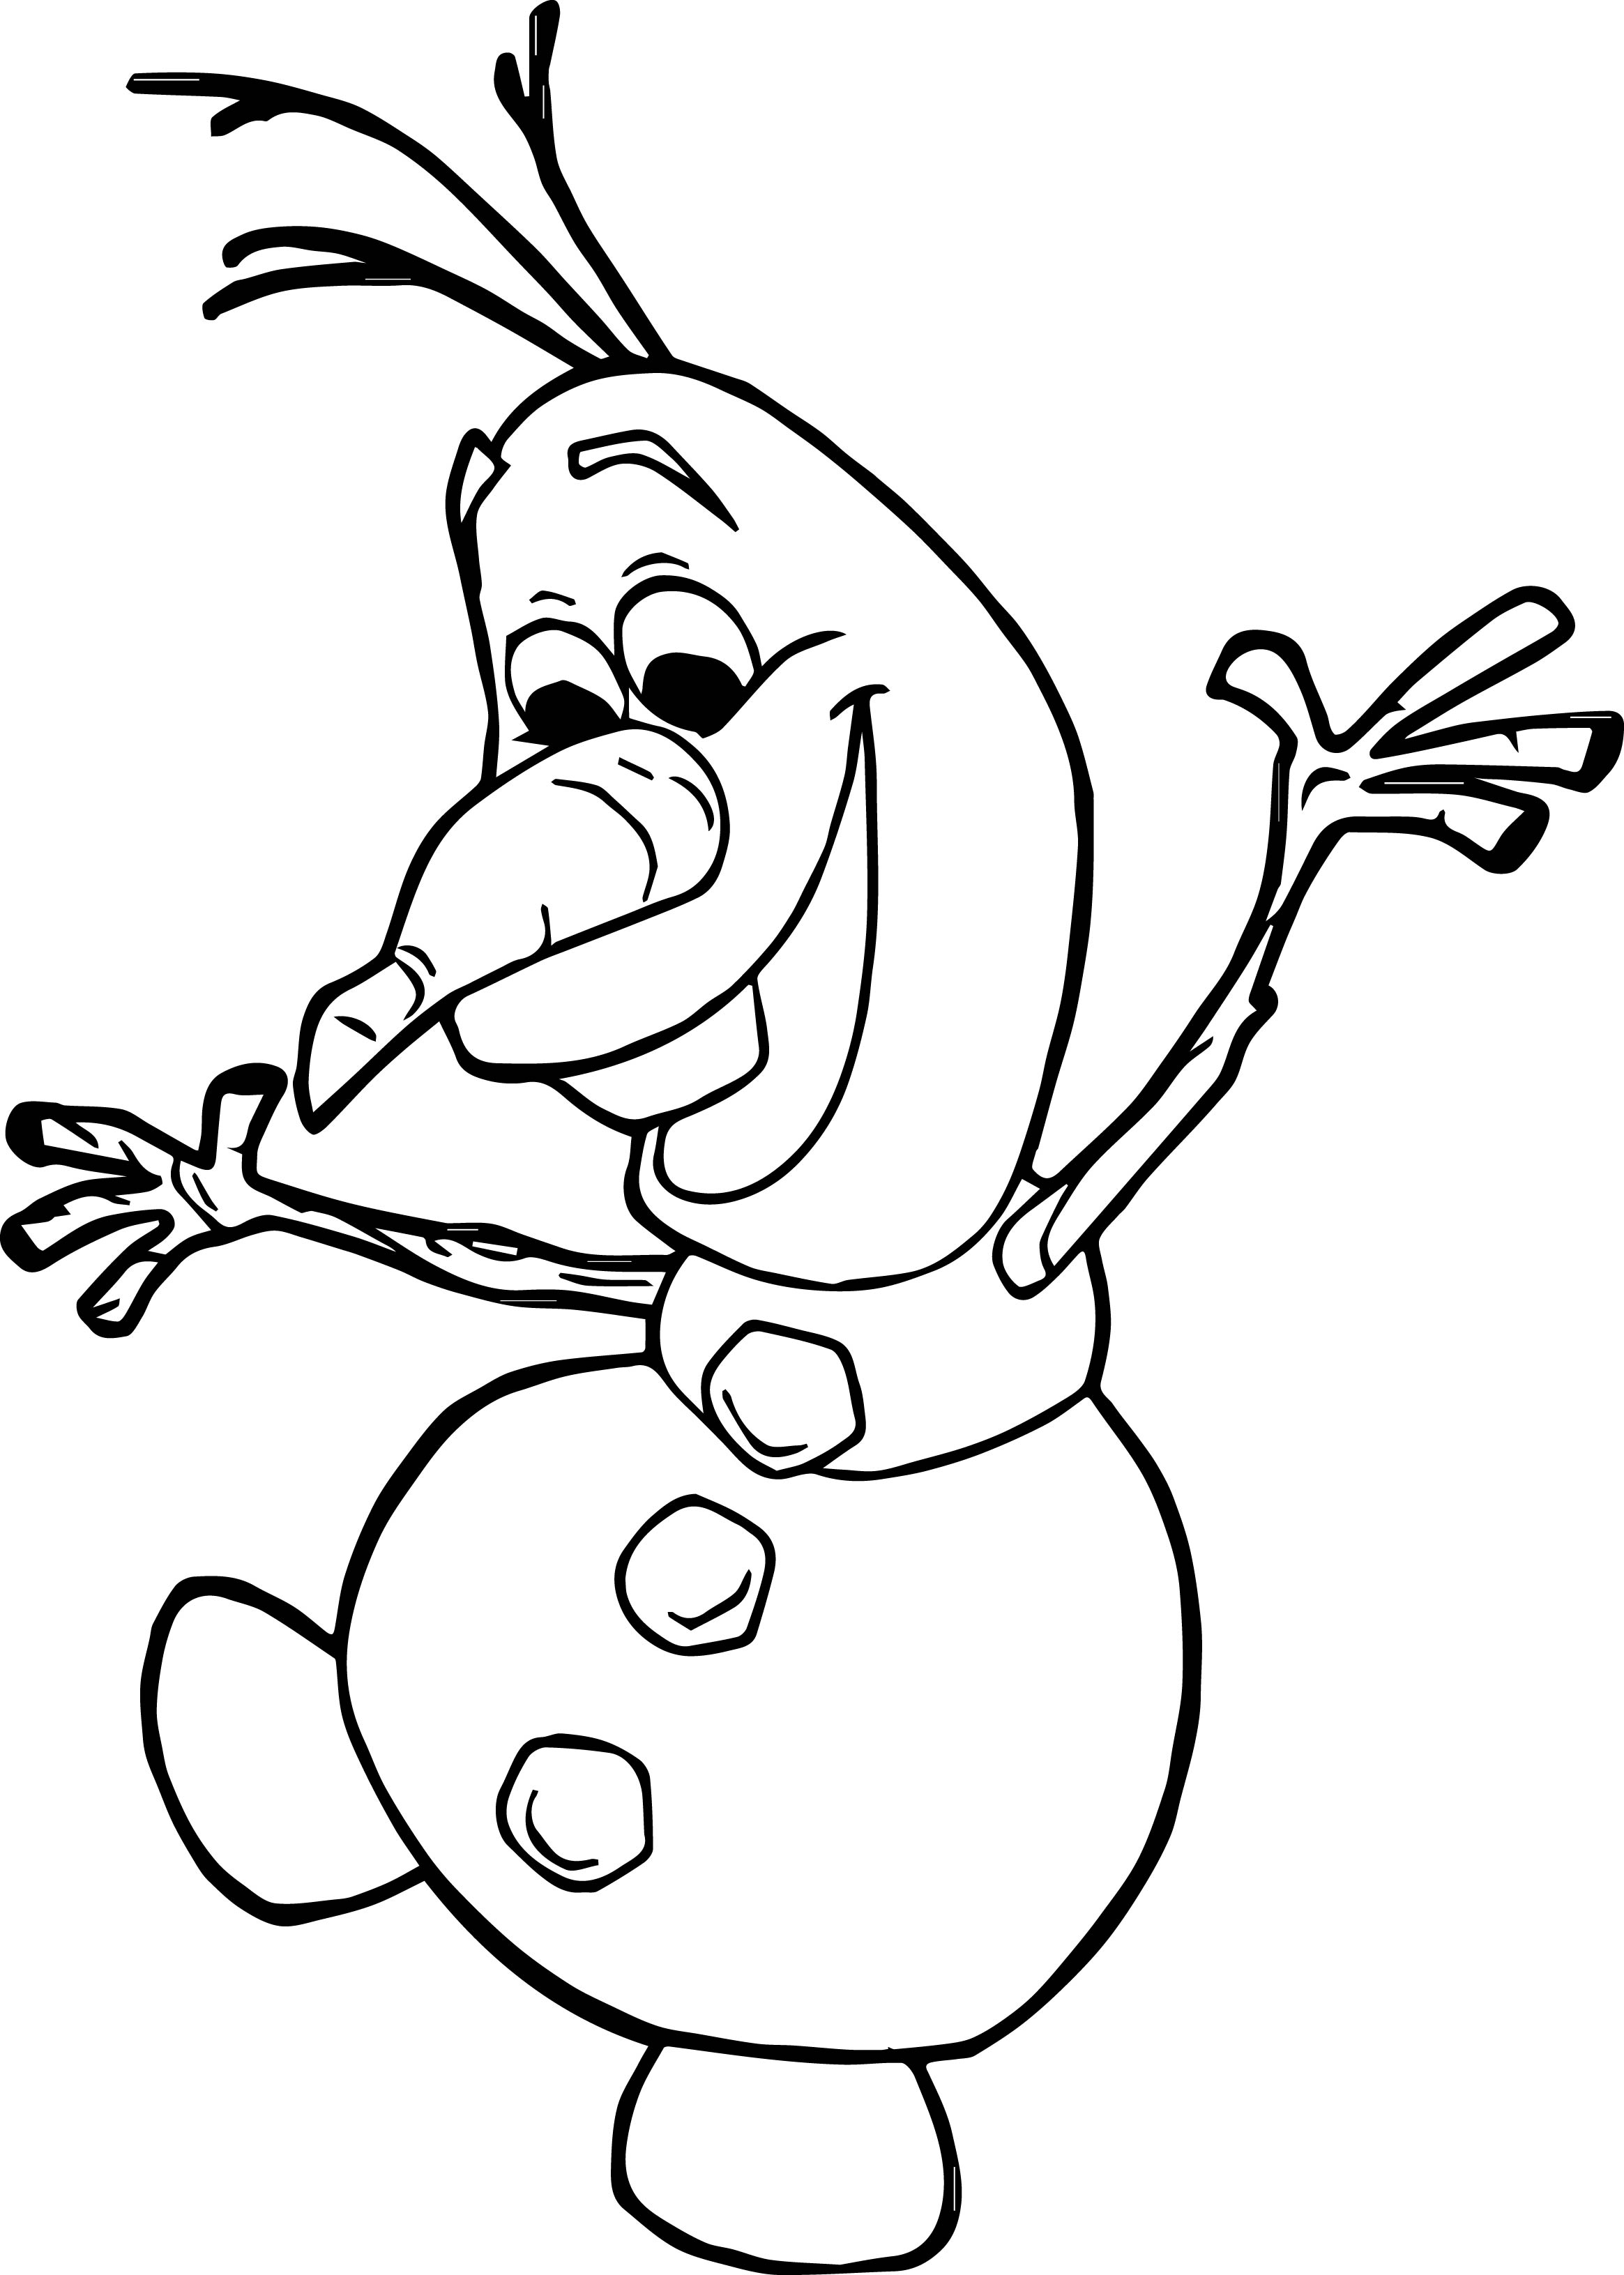 Free Printable Olaf Coloring Pages at Free printable